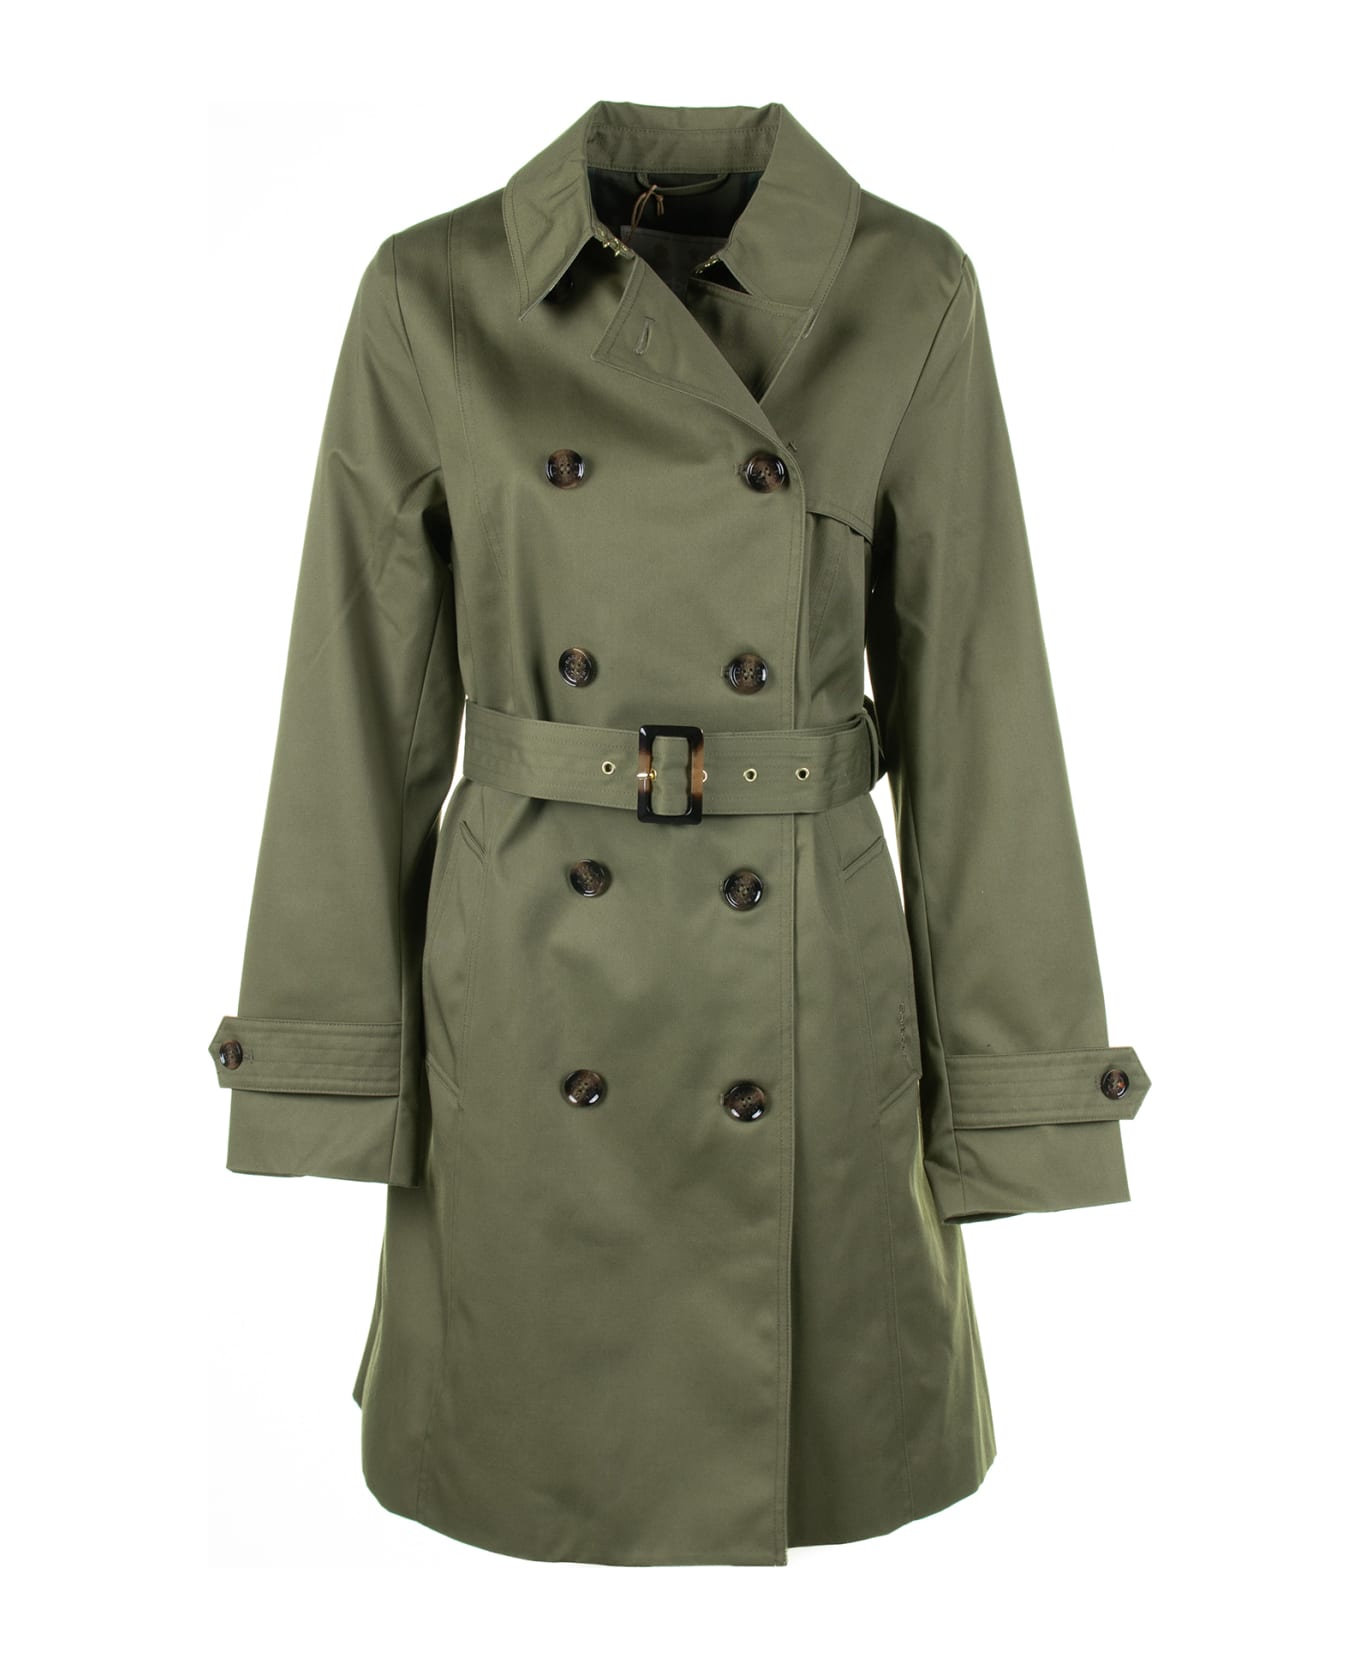 Barbour Green Waterproof Twill Trench Coat - BURNT OLIVE/ANCIENT POLAR